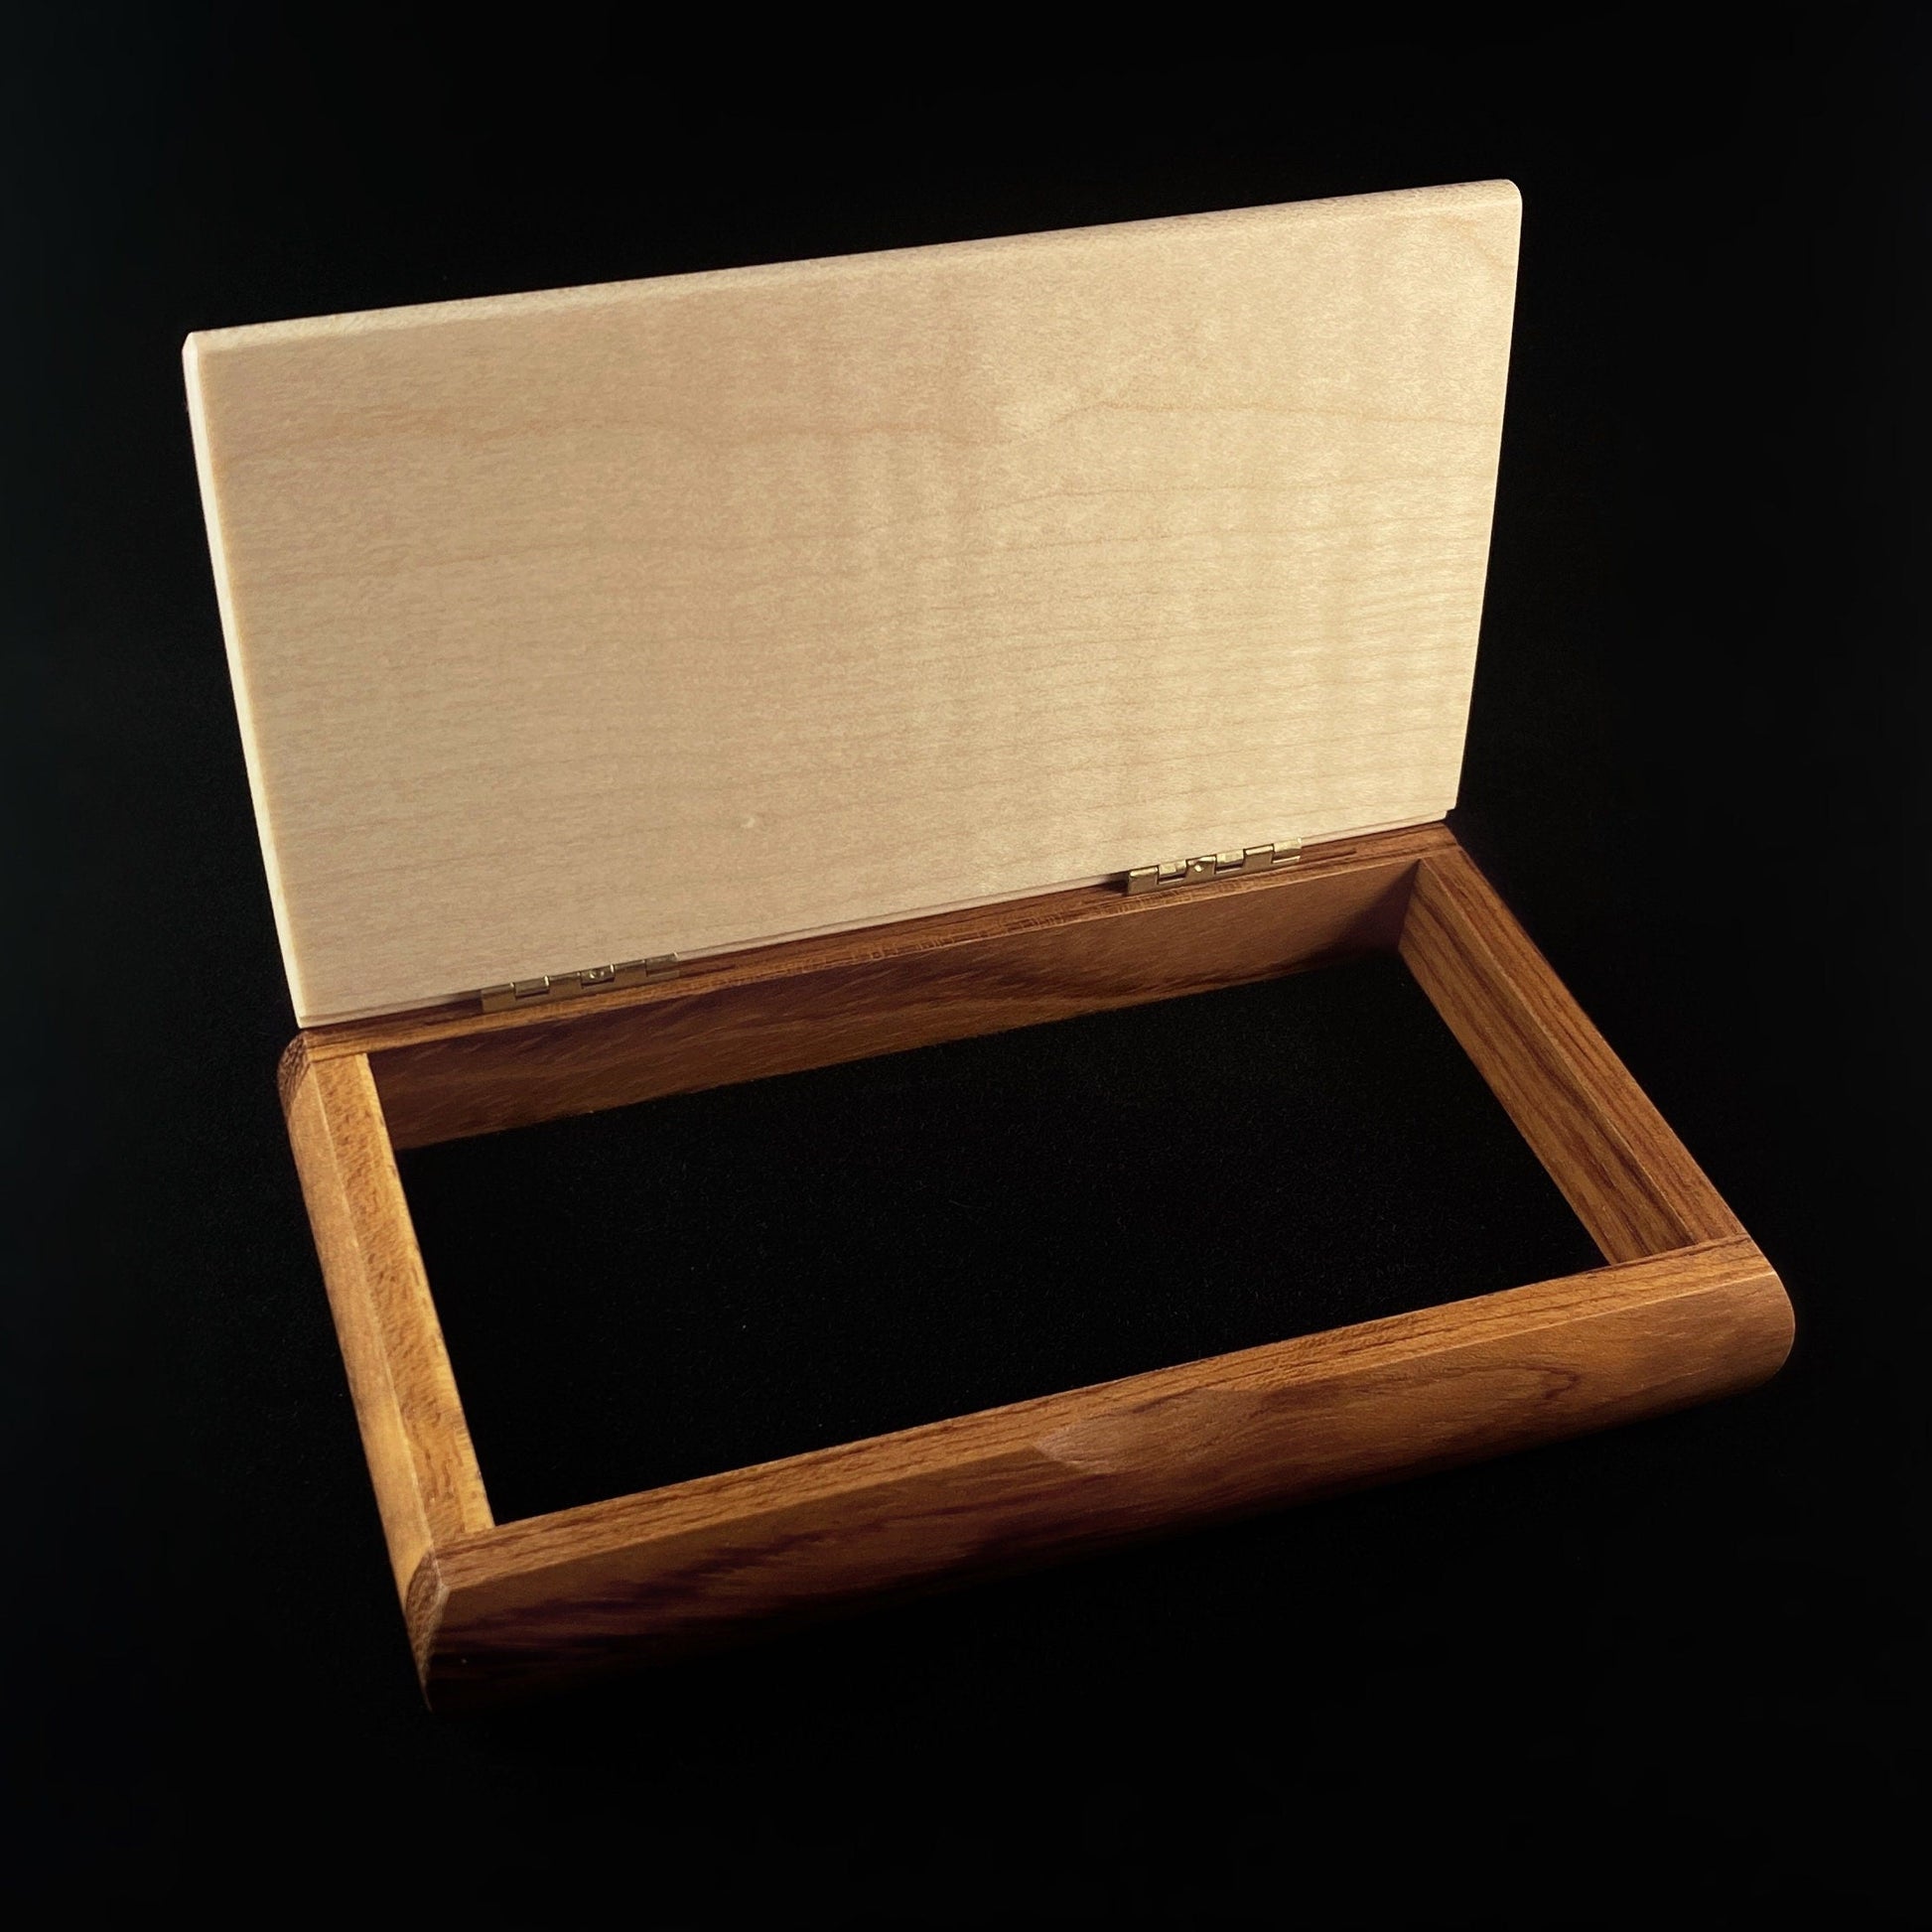 Dream Quote Box, Handmade Wooden Box with Curly Maple and Bubinga, made in USA